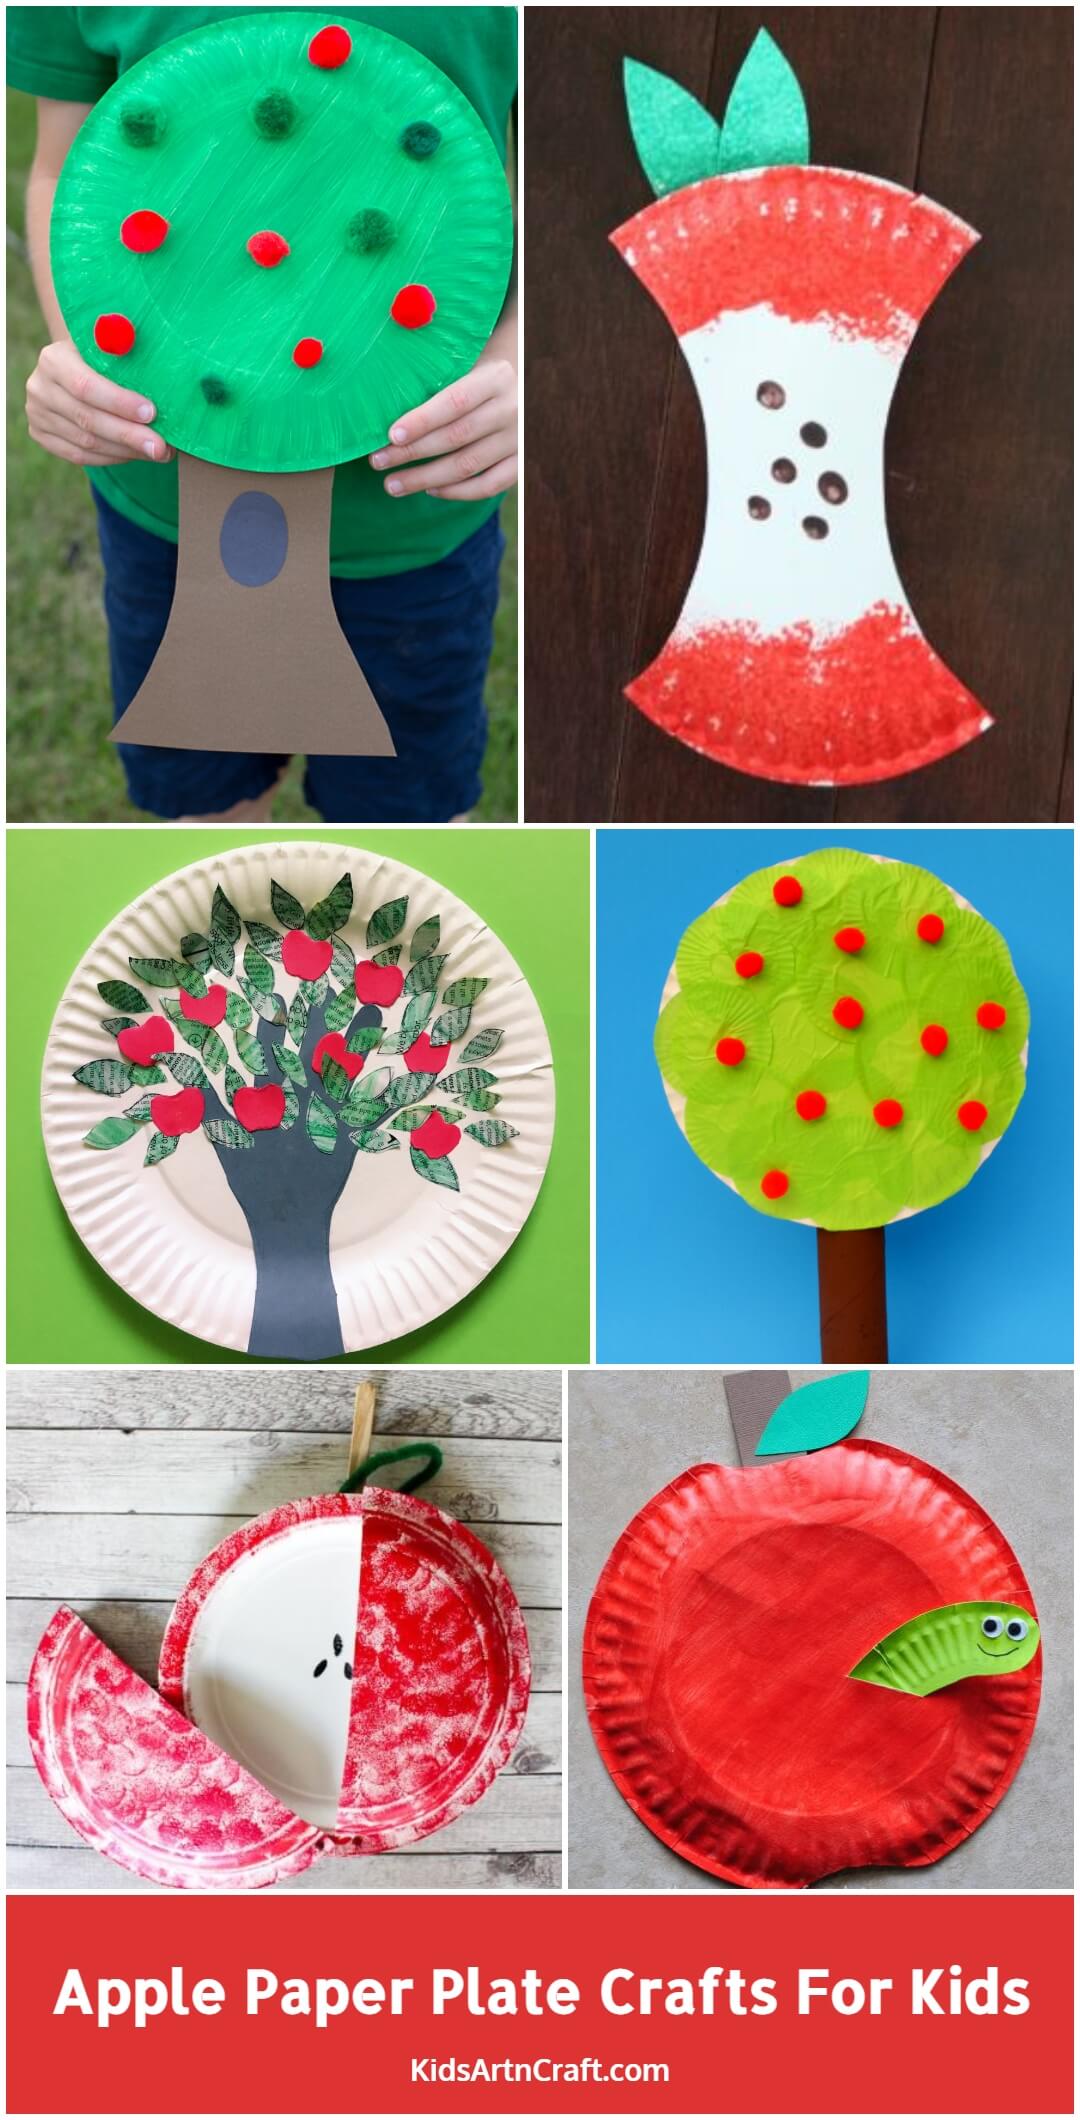 Apple Paper Plate Crafts for Kids